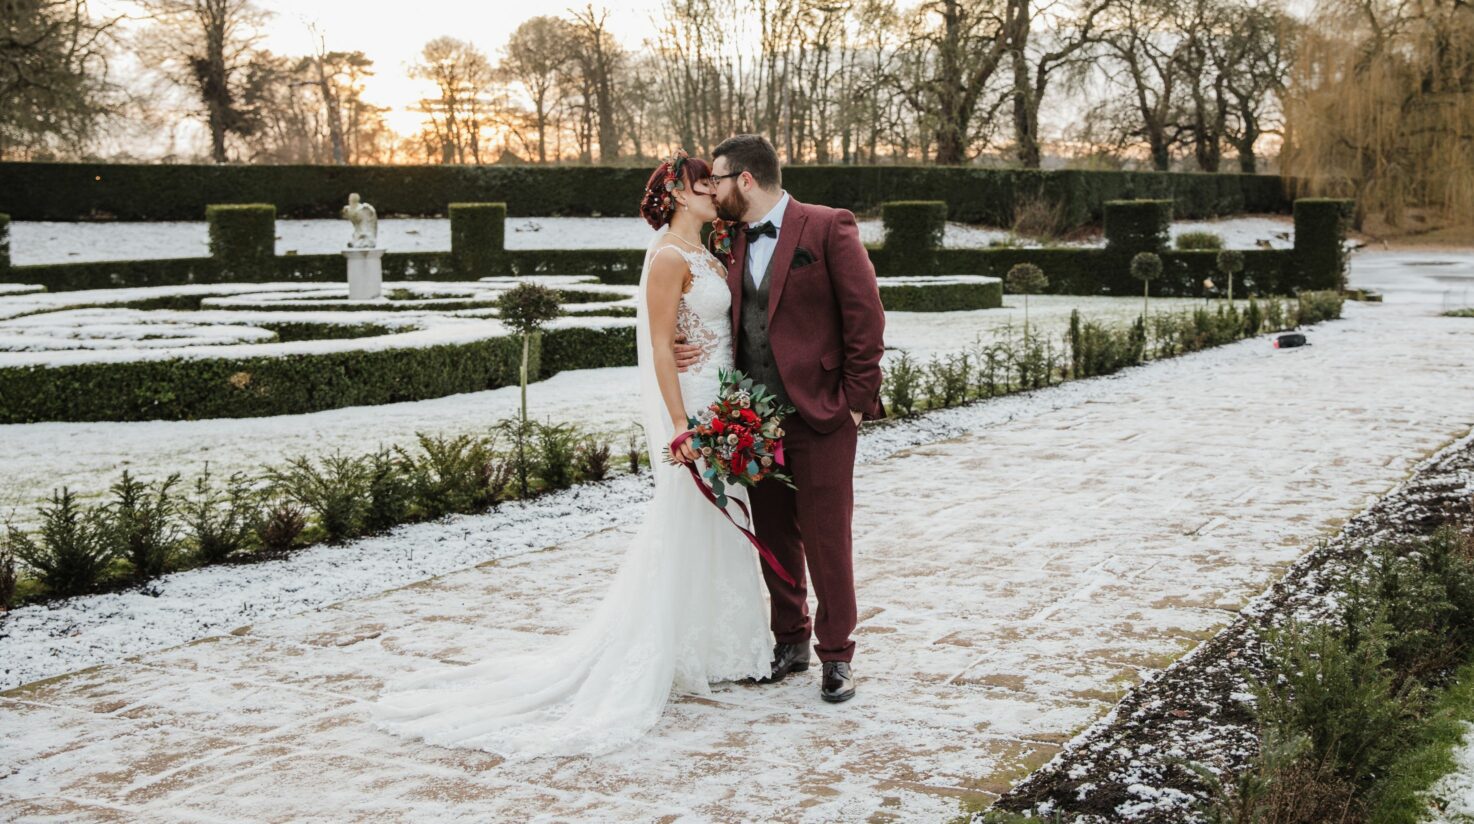 Bride and groom stand surrounded by snow-topped lawns - Coombe's affordable wedding venue